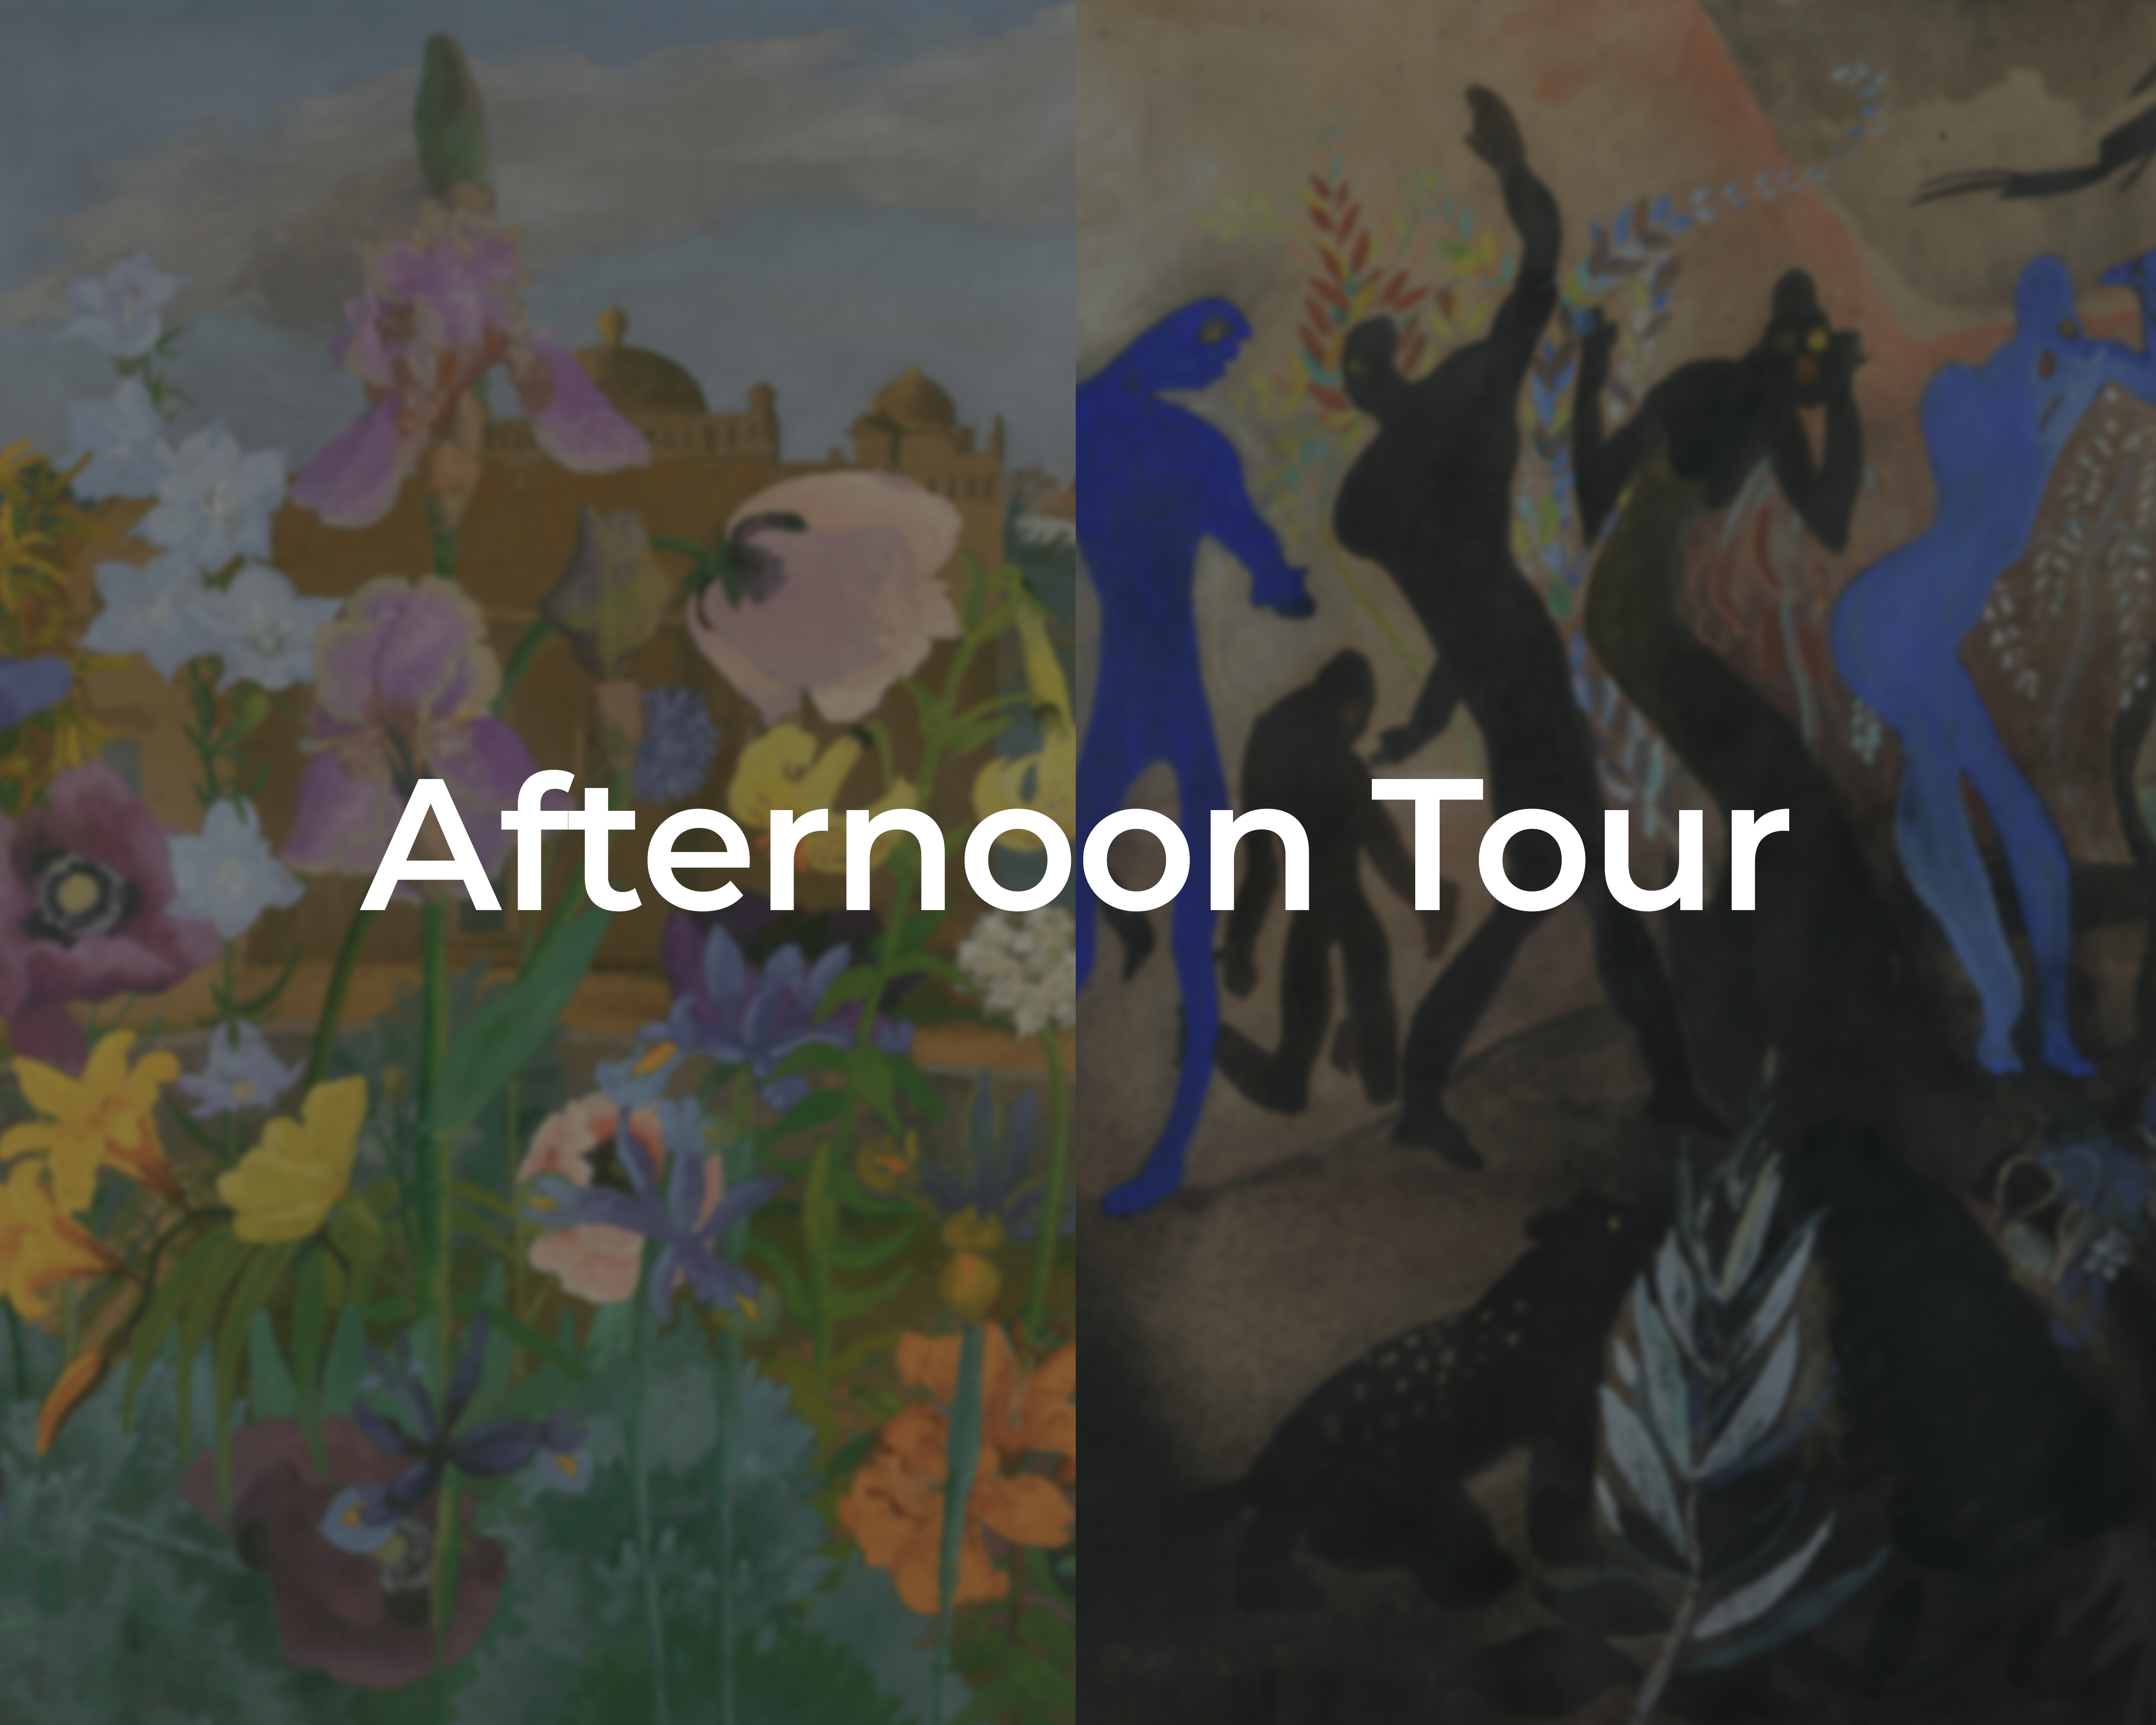 An image of a Cedric Morris's painting beside a drawing by Arthur Lett-Haines. Overlayed is text which reads: Afternoon Tour.